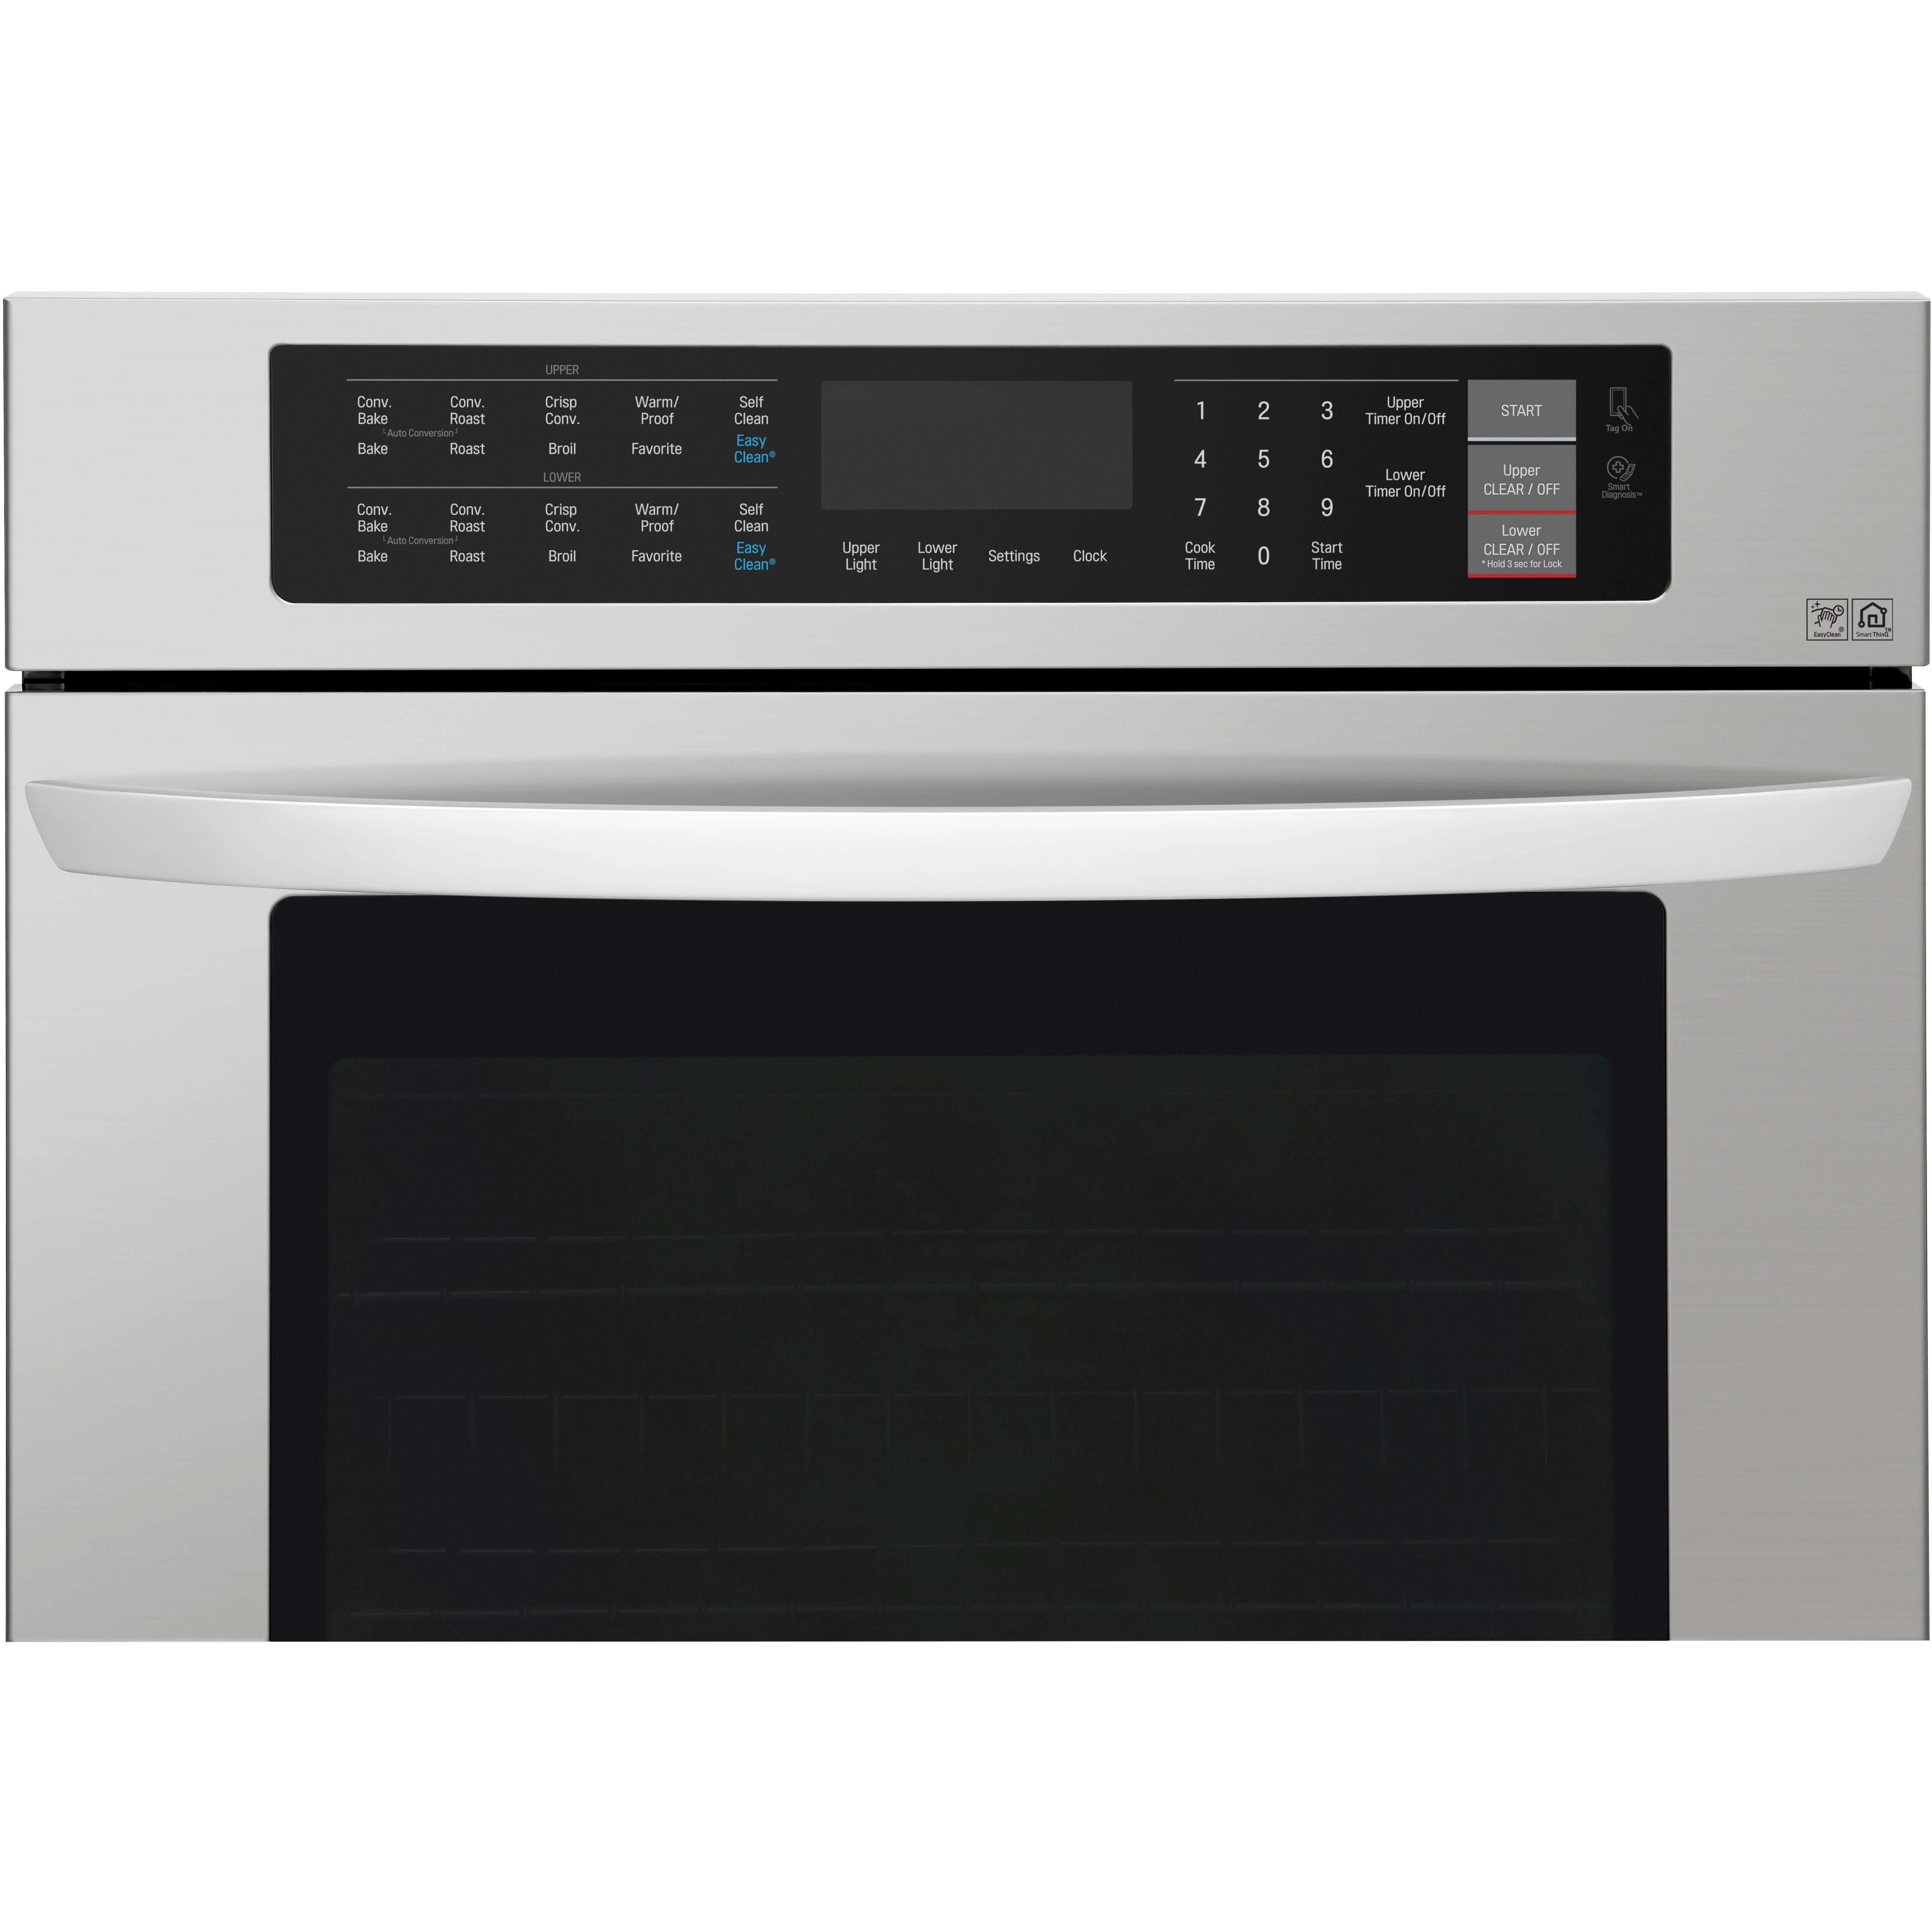 LG 30 in. Electric Double Wall Oven with True Convection in Stainless Steel (LWD3063ST)